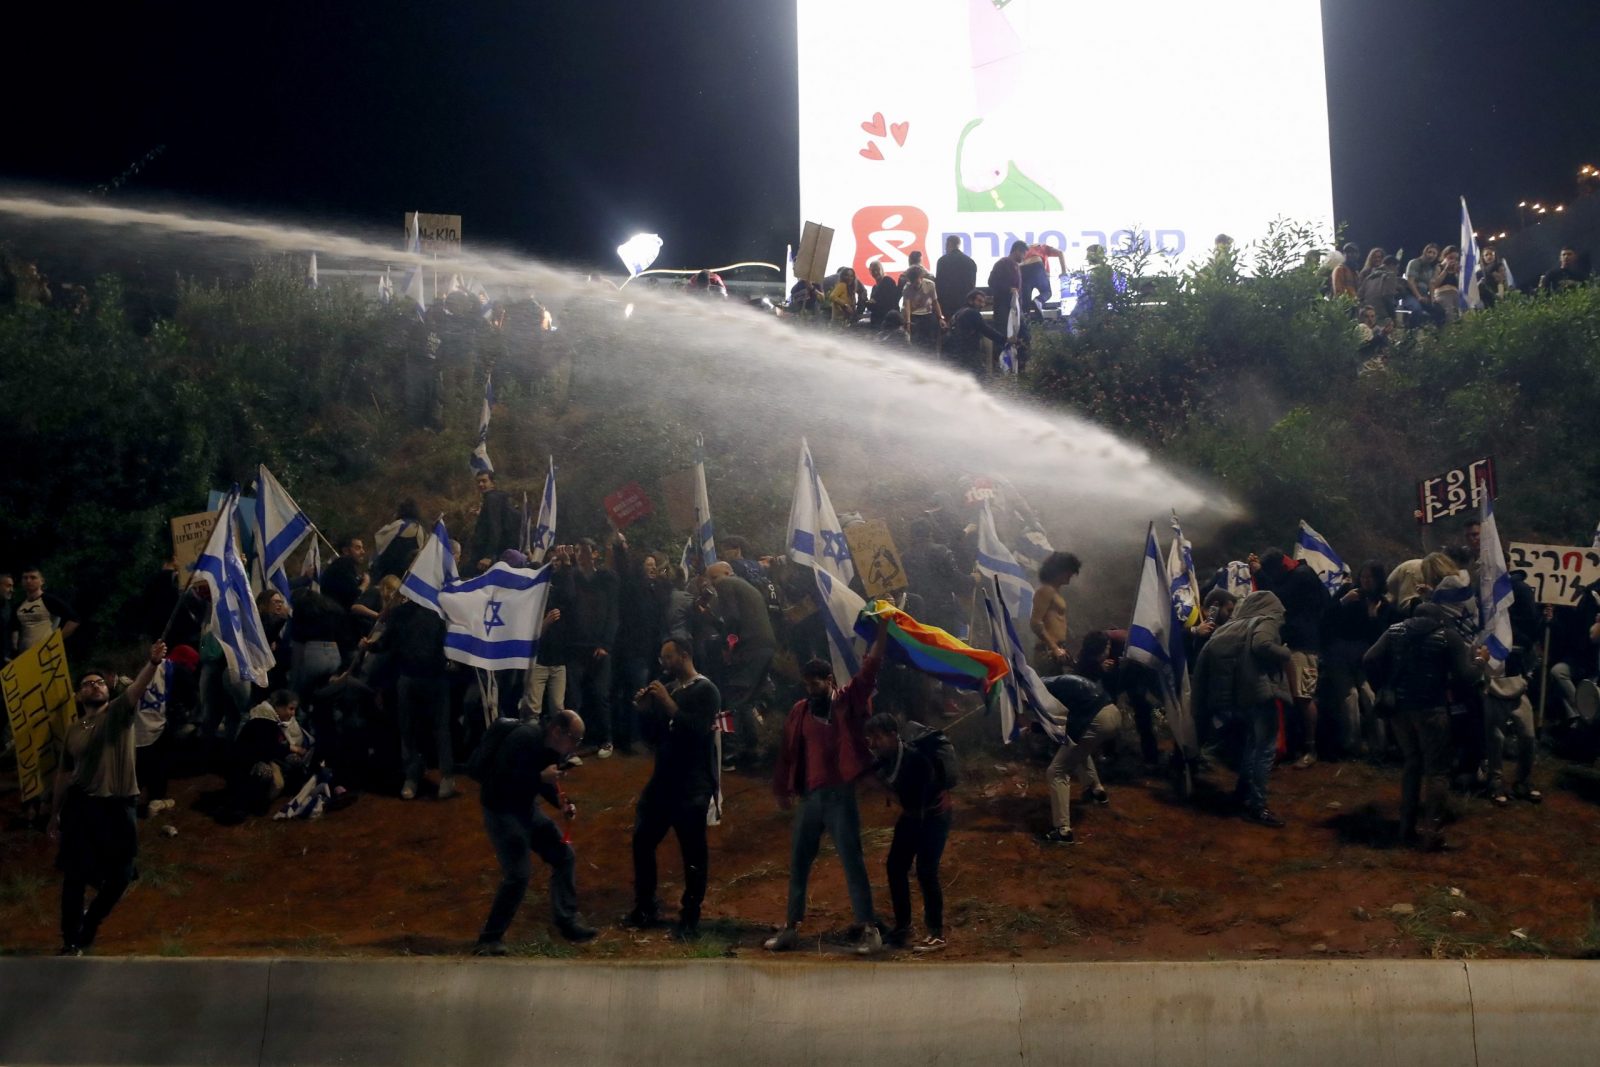 epa10554319 Police use water canons to disperse demonstrators in Ayalon highway during a protest against the government's justice system reform plans in Tel Aviv, Israel, 01 April 2023. Israeli prime minister announced on 27 March his government's suspension of a judicial overhaul legislation and starting negotiations with opposition leaders after 12 weeks of mass protests across the country.  EPA/ATEF SAFADI